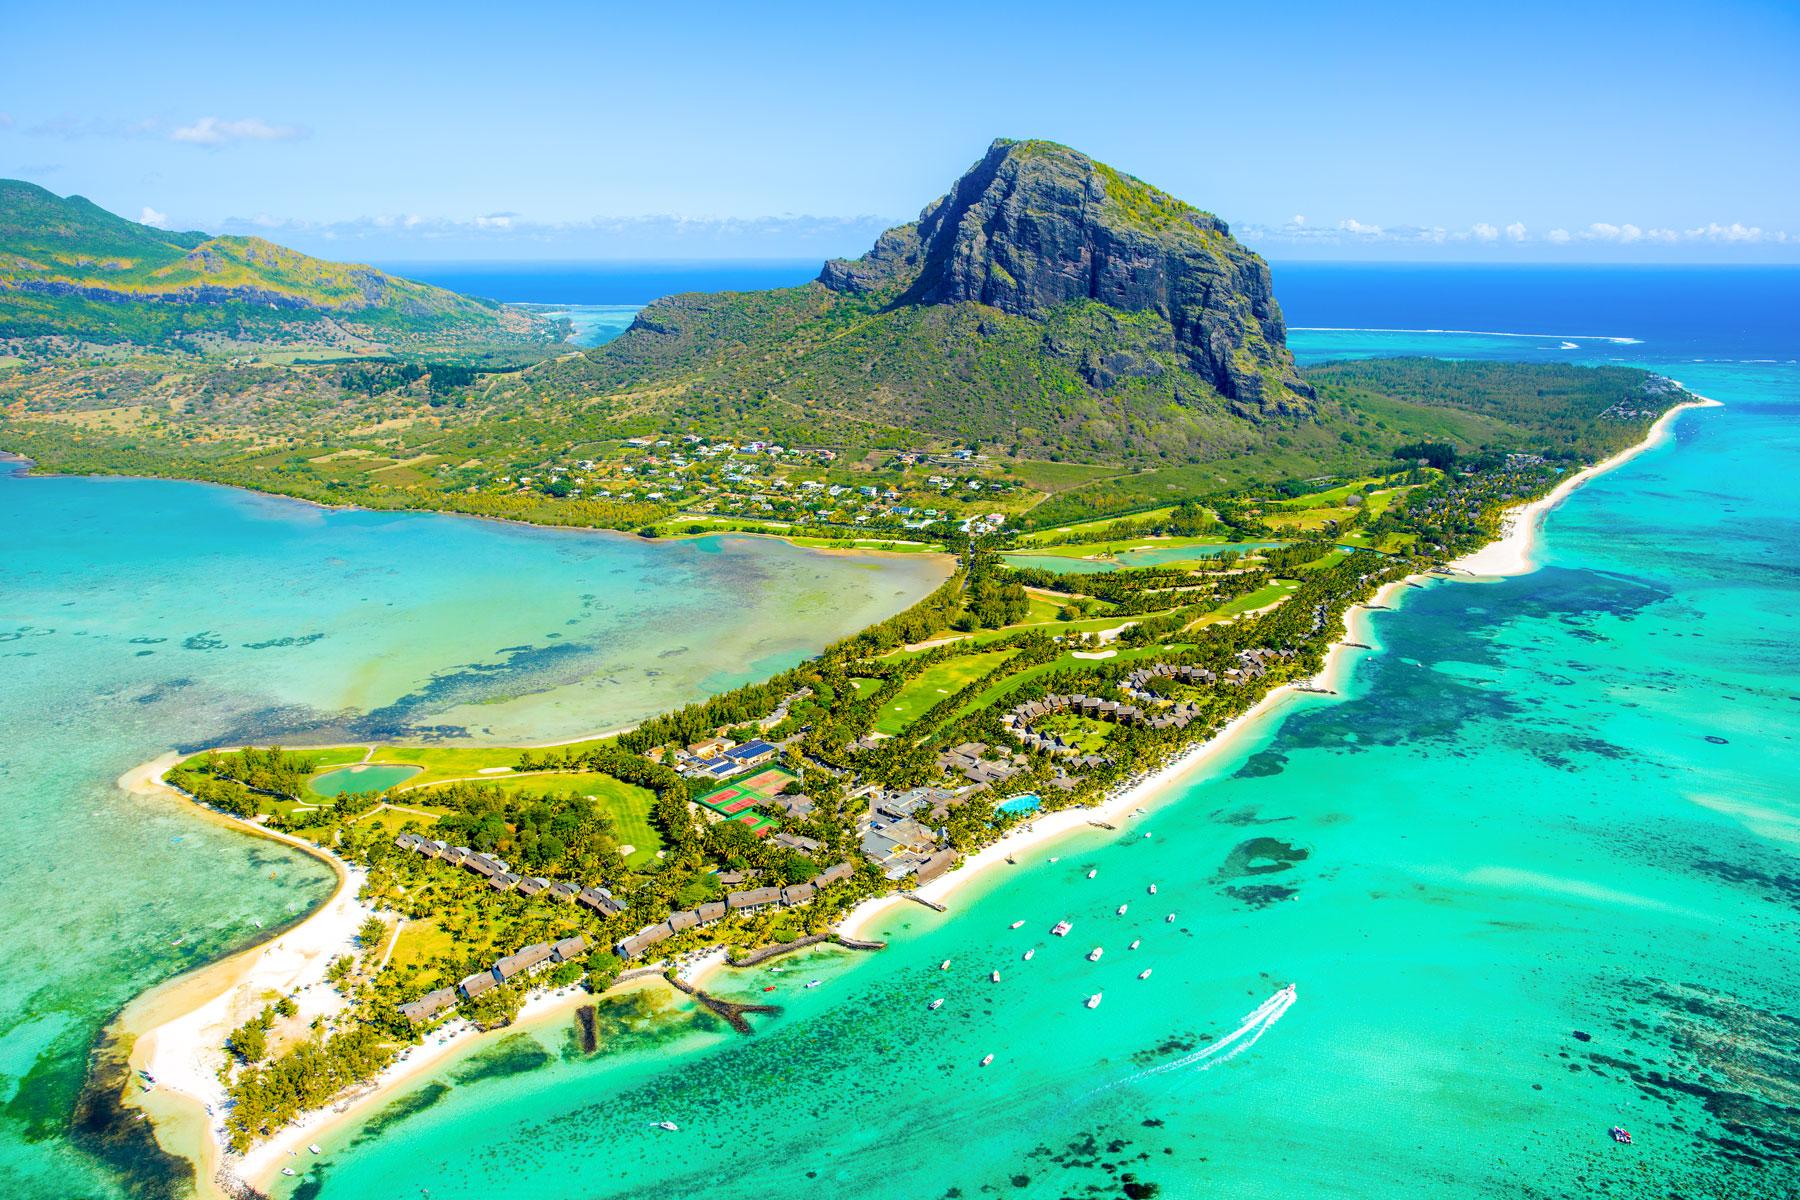 travel guides channel 9 mauritius